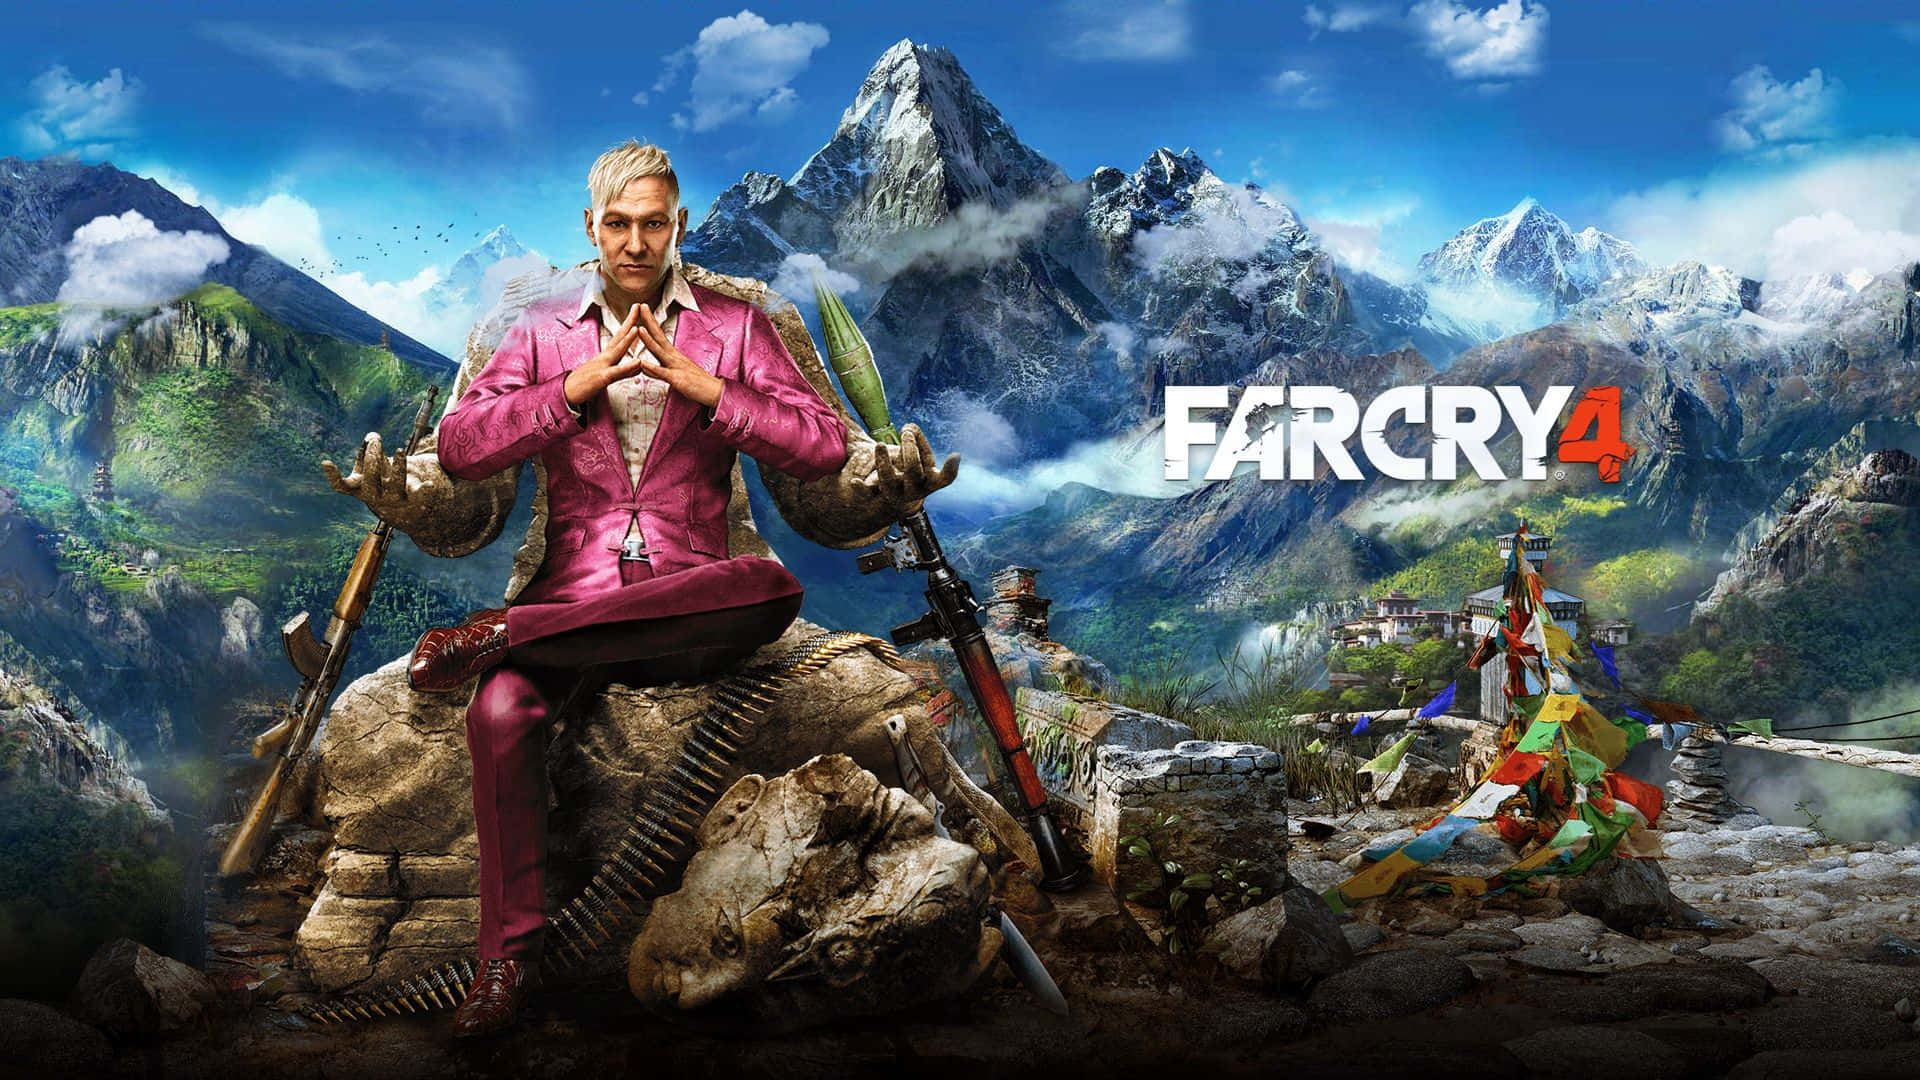 1920x1080 Far Cry 4 Background Wallpaper